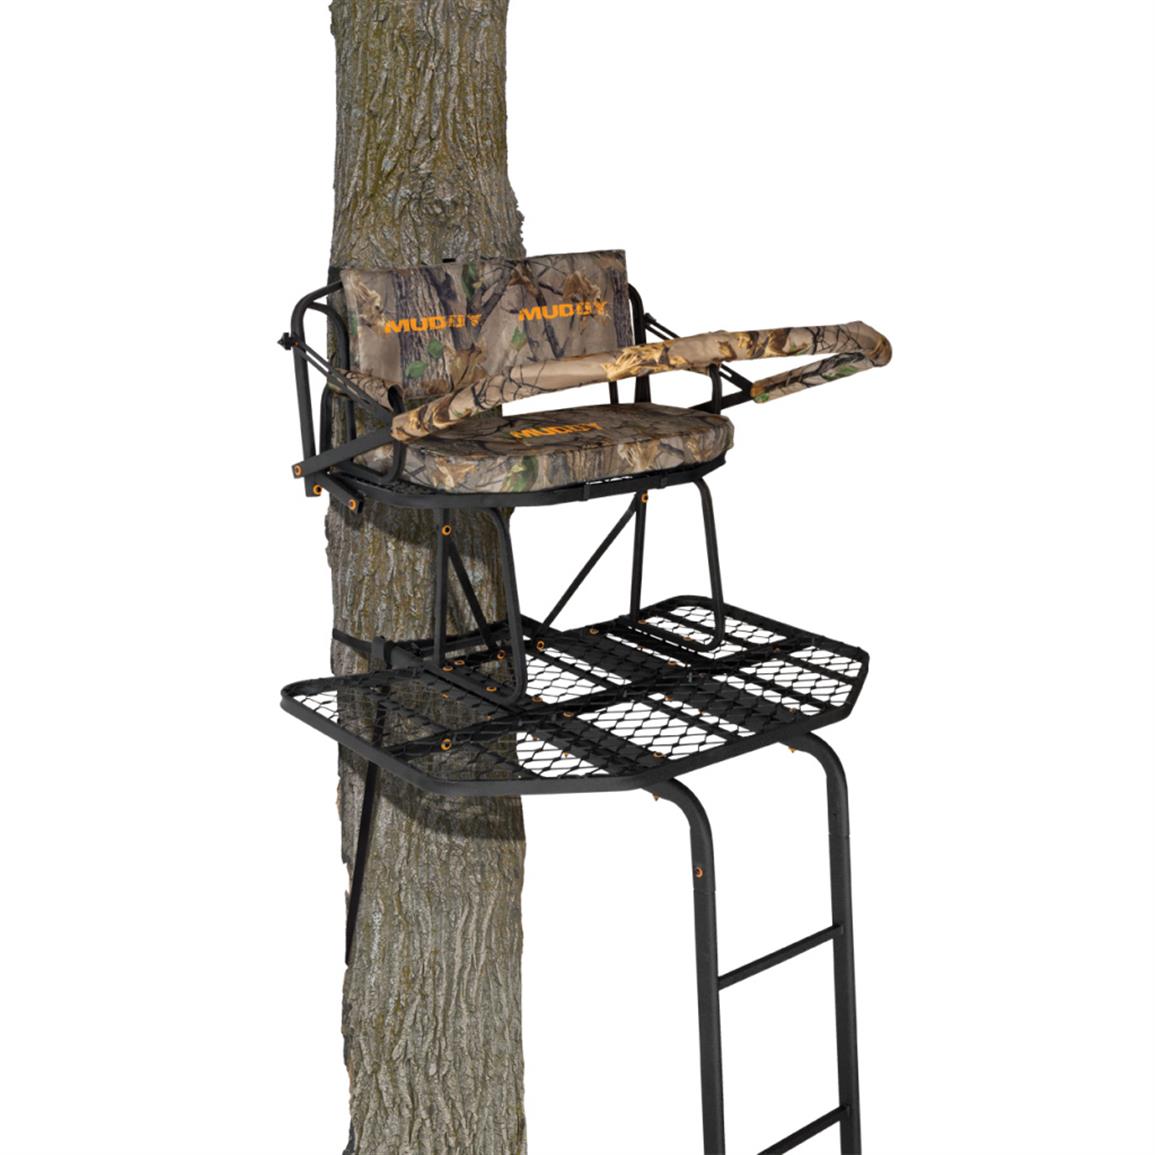 Muddy The Prestige Ladder Tree Stand, 2 Man, 16' 654192, Ladder Tree Stands at Sportsman's Guide